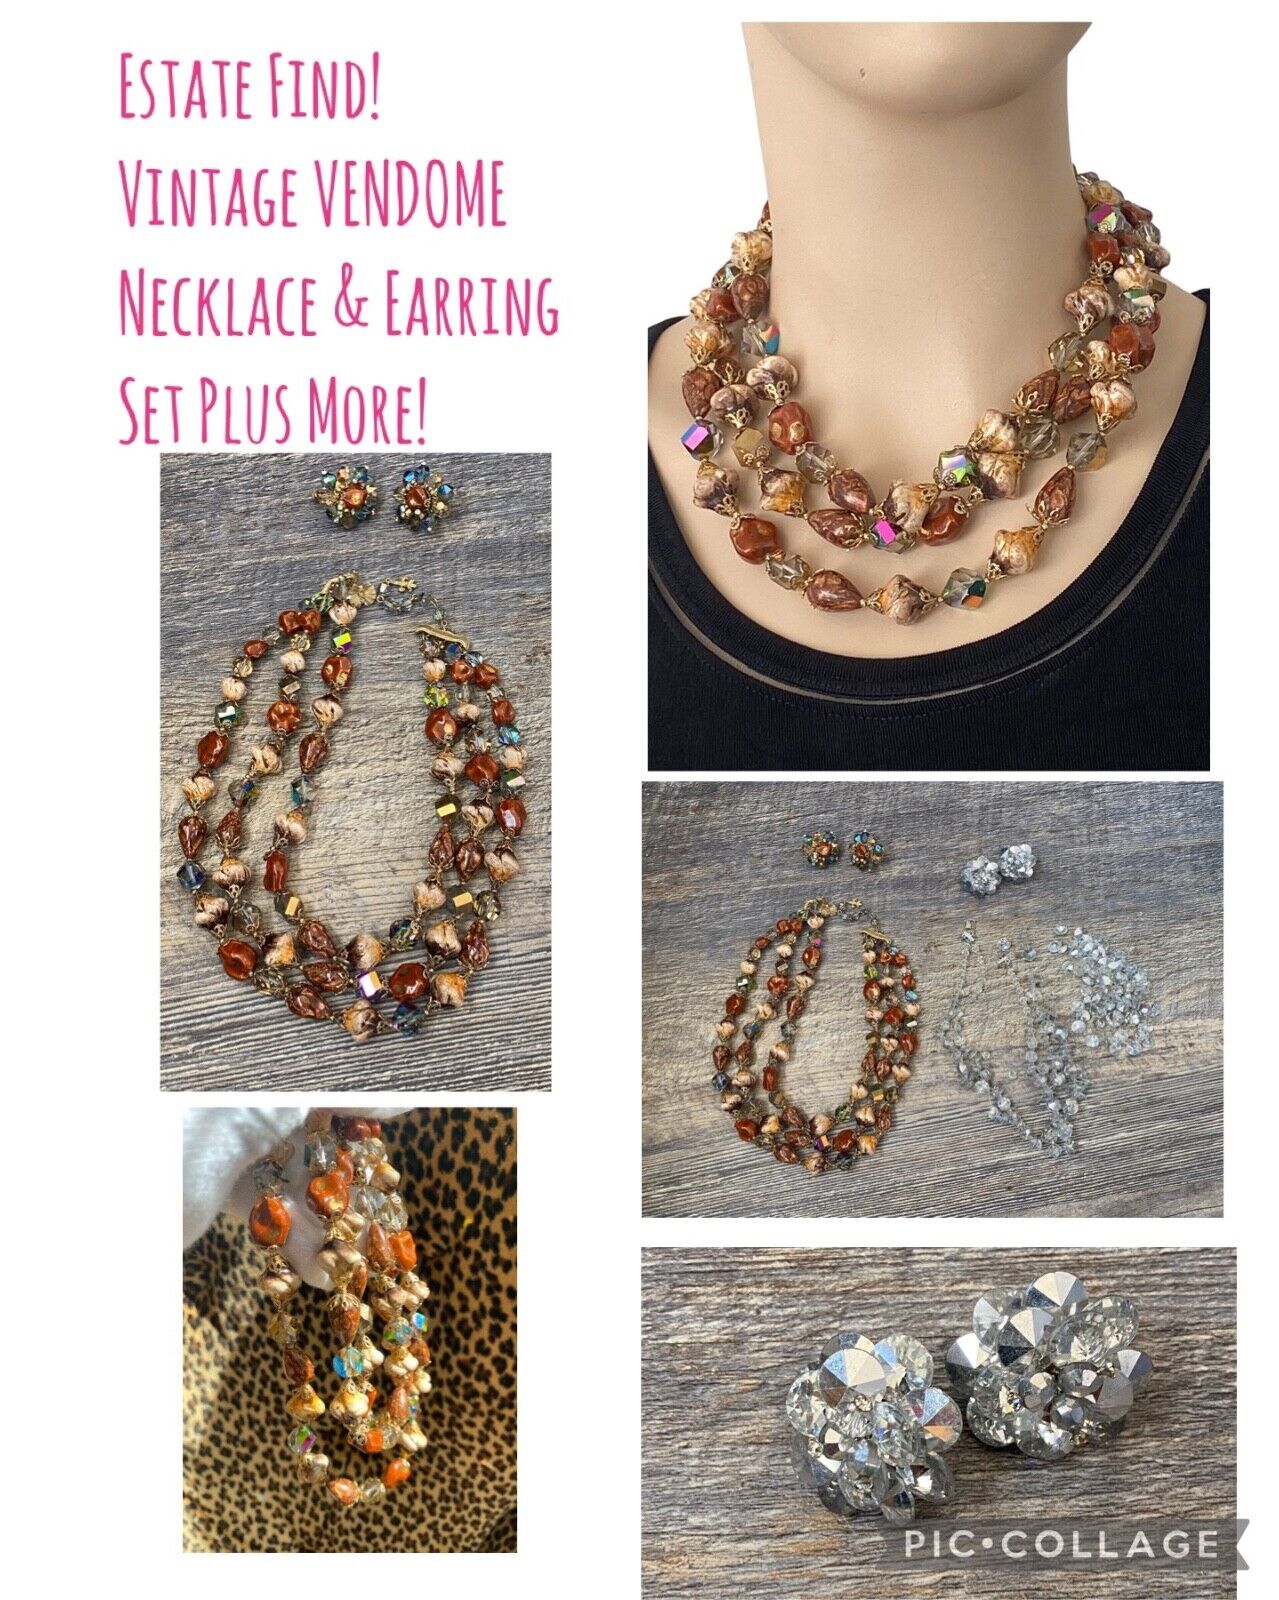 Vintage VENDOME By CORO Necklace & Earrings Set + Extra Earrings + See Video